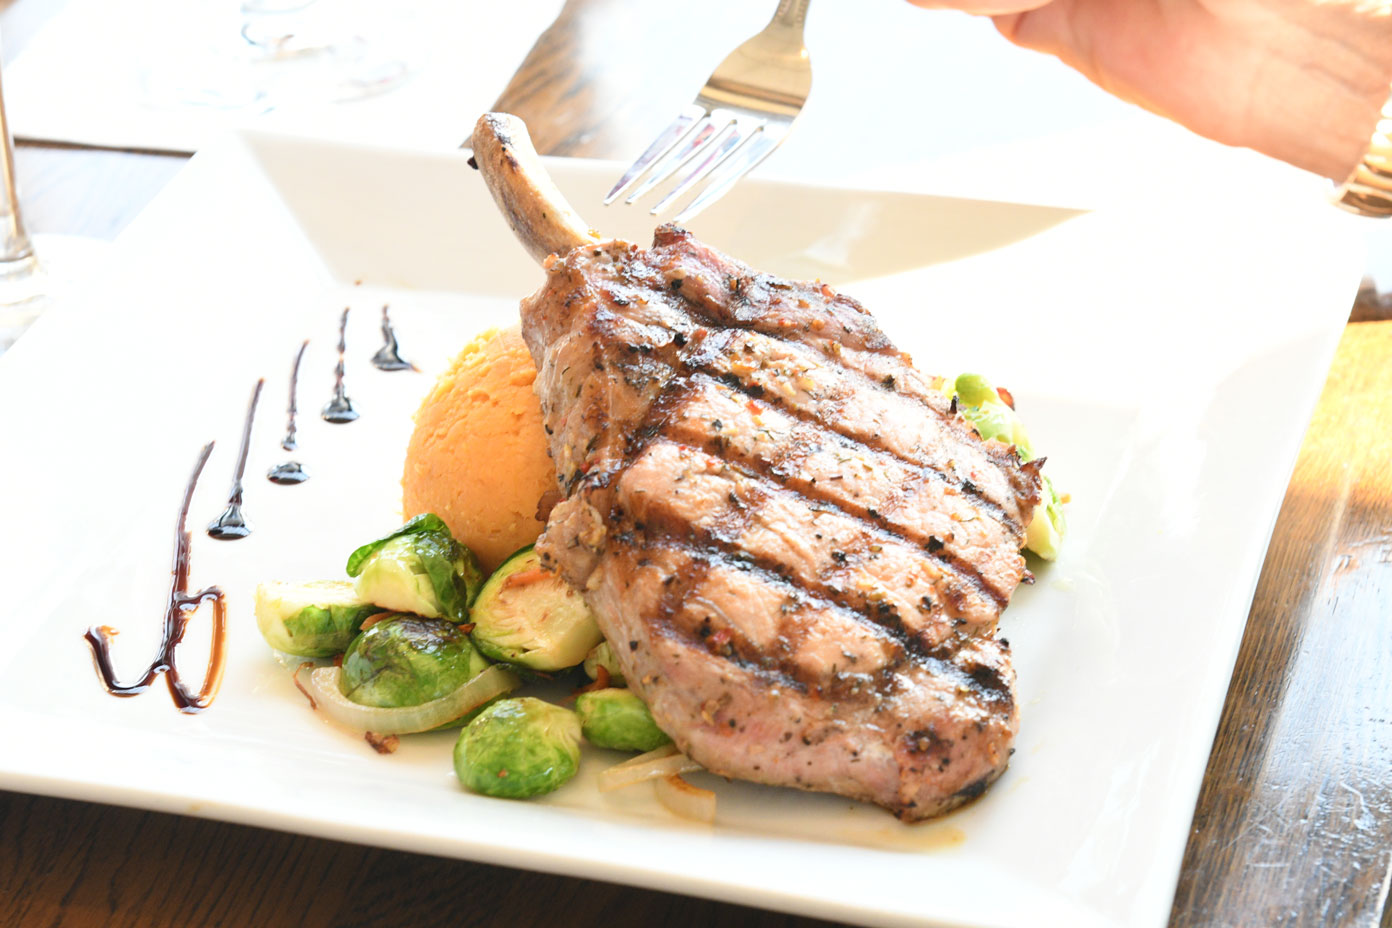 Beautifully plated pork chop, one of the items on the Yacht Club's menu.